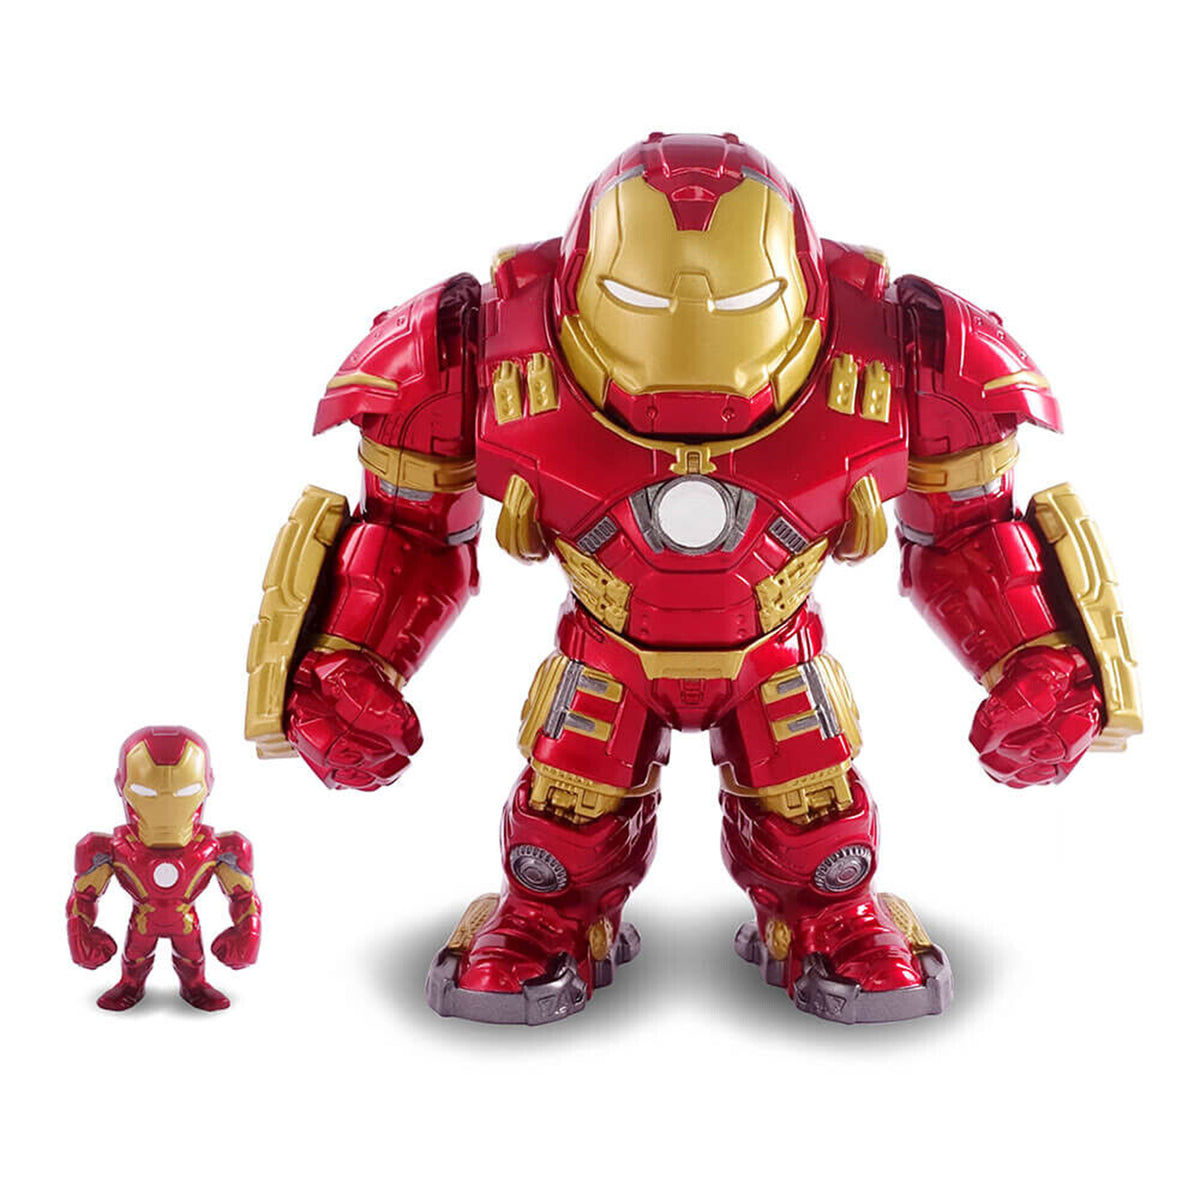 Toys Marvel 6" Hulkbuster & 2" Iron Man Die-Cast Collectible Toy Figure